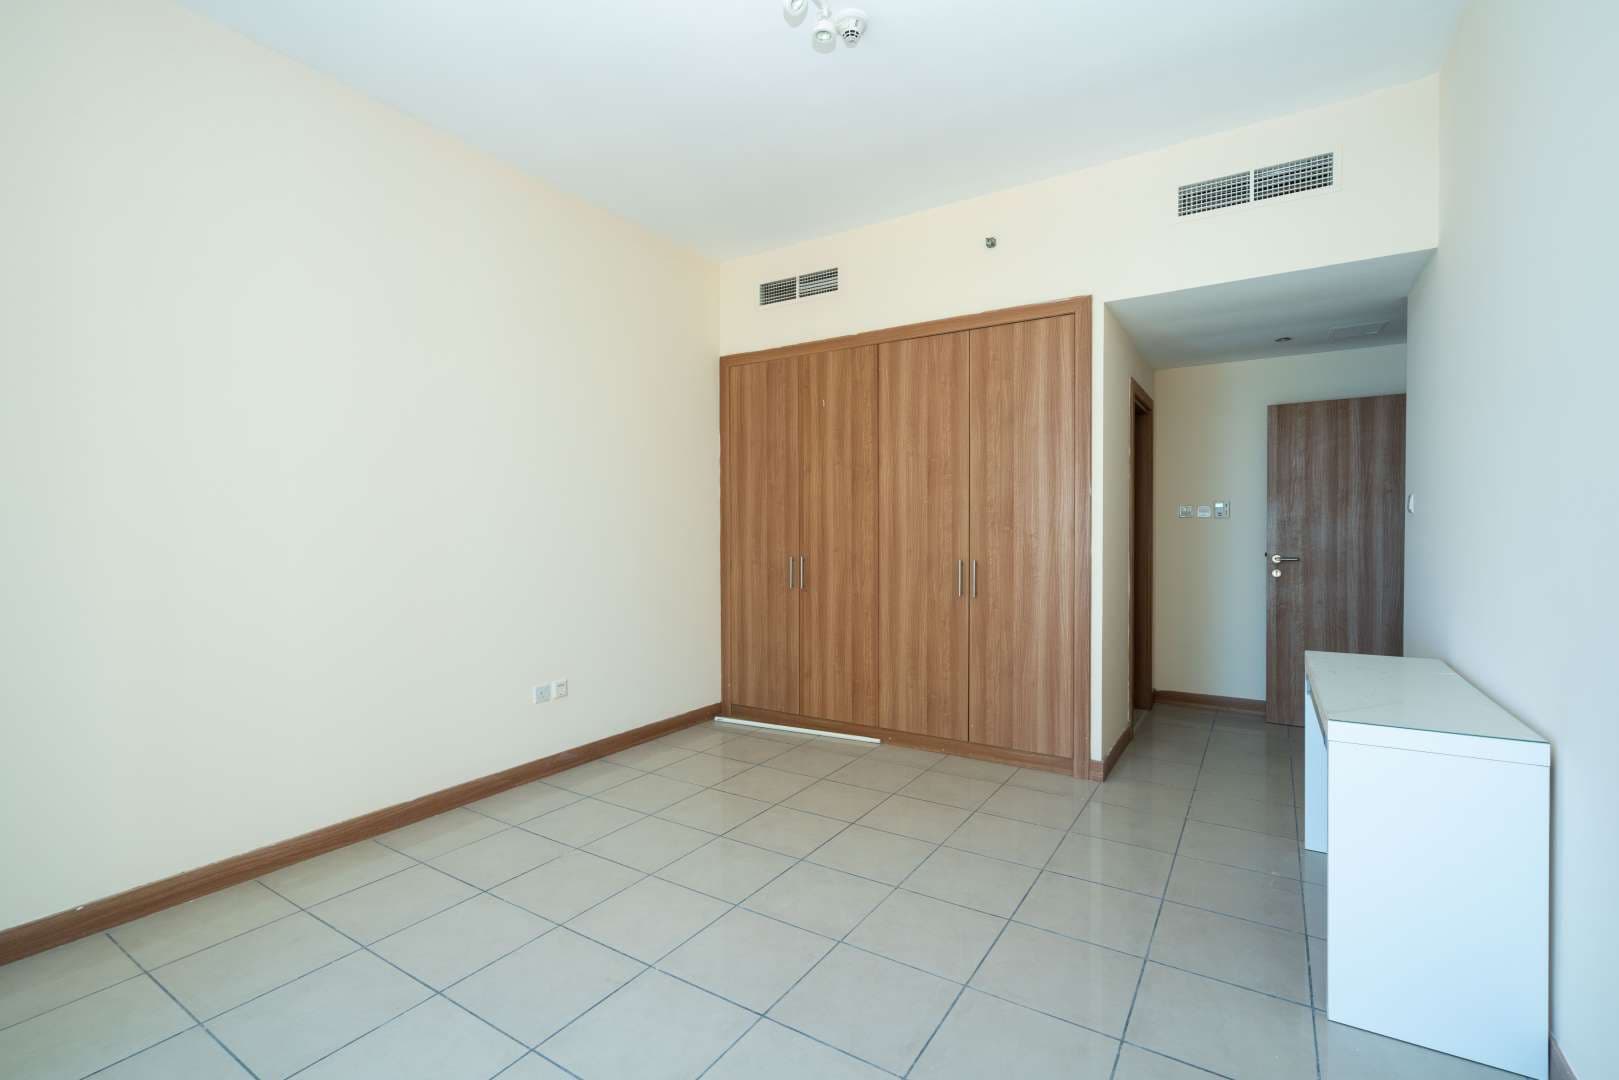 3 Bedroom Apartment For Rent Sulafa Tower Lp04976 A93b0f422644580.jpg